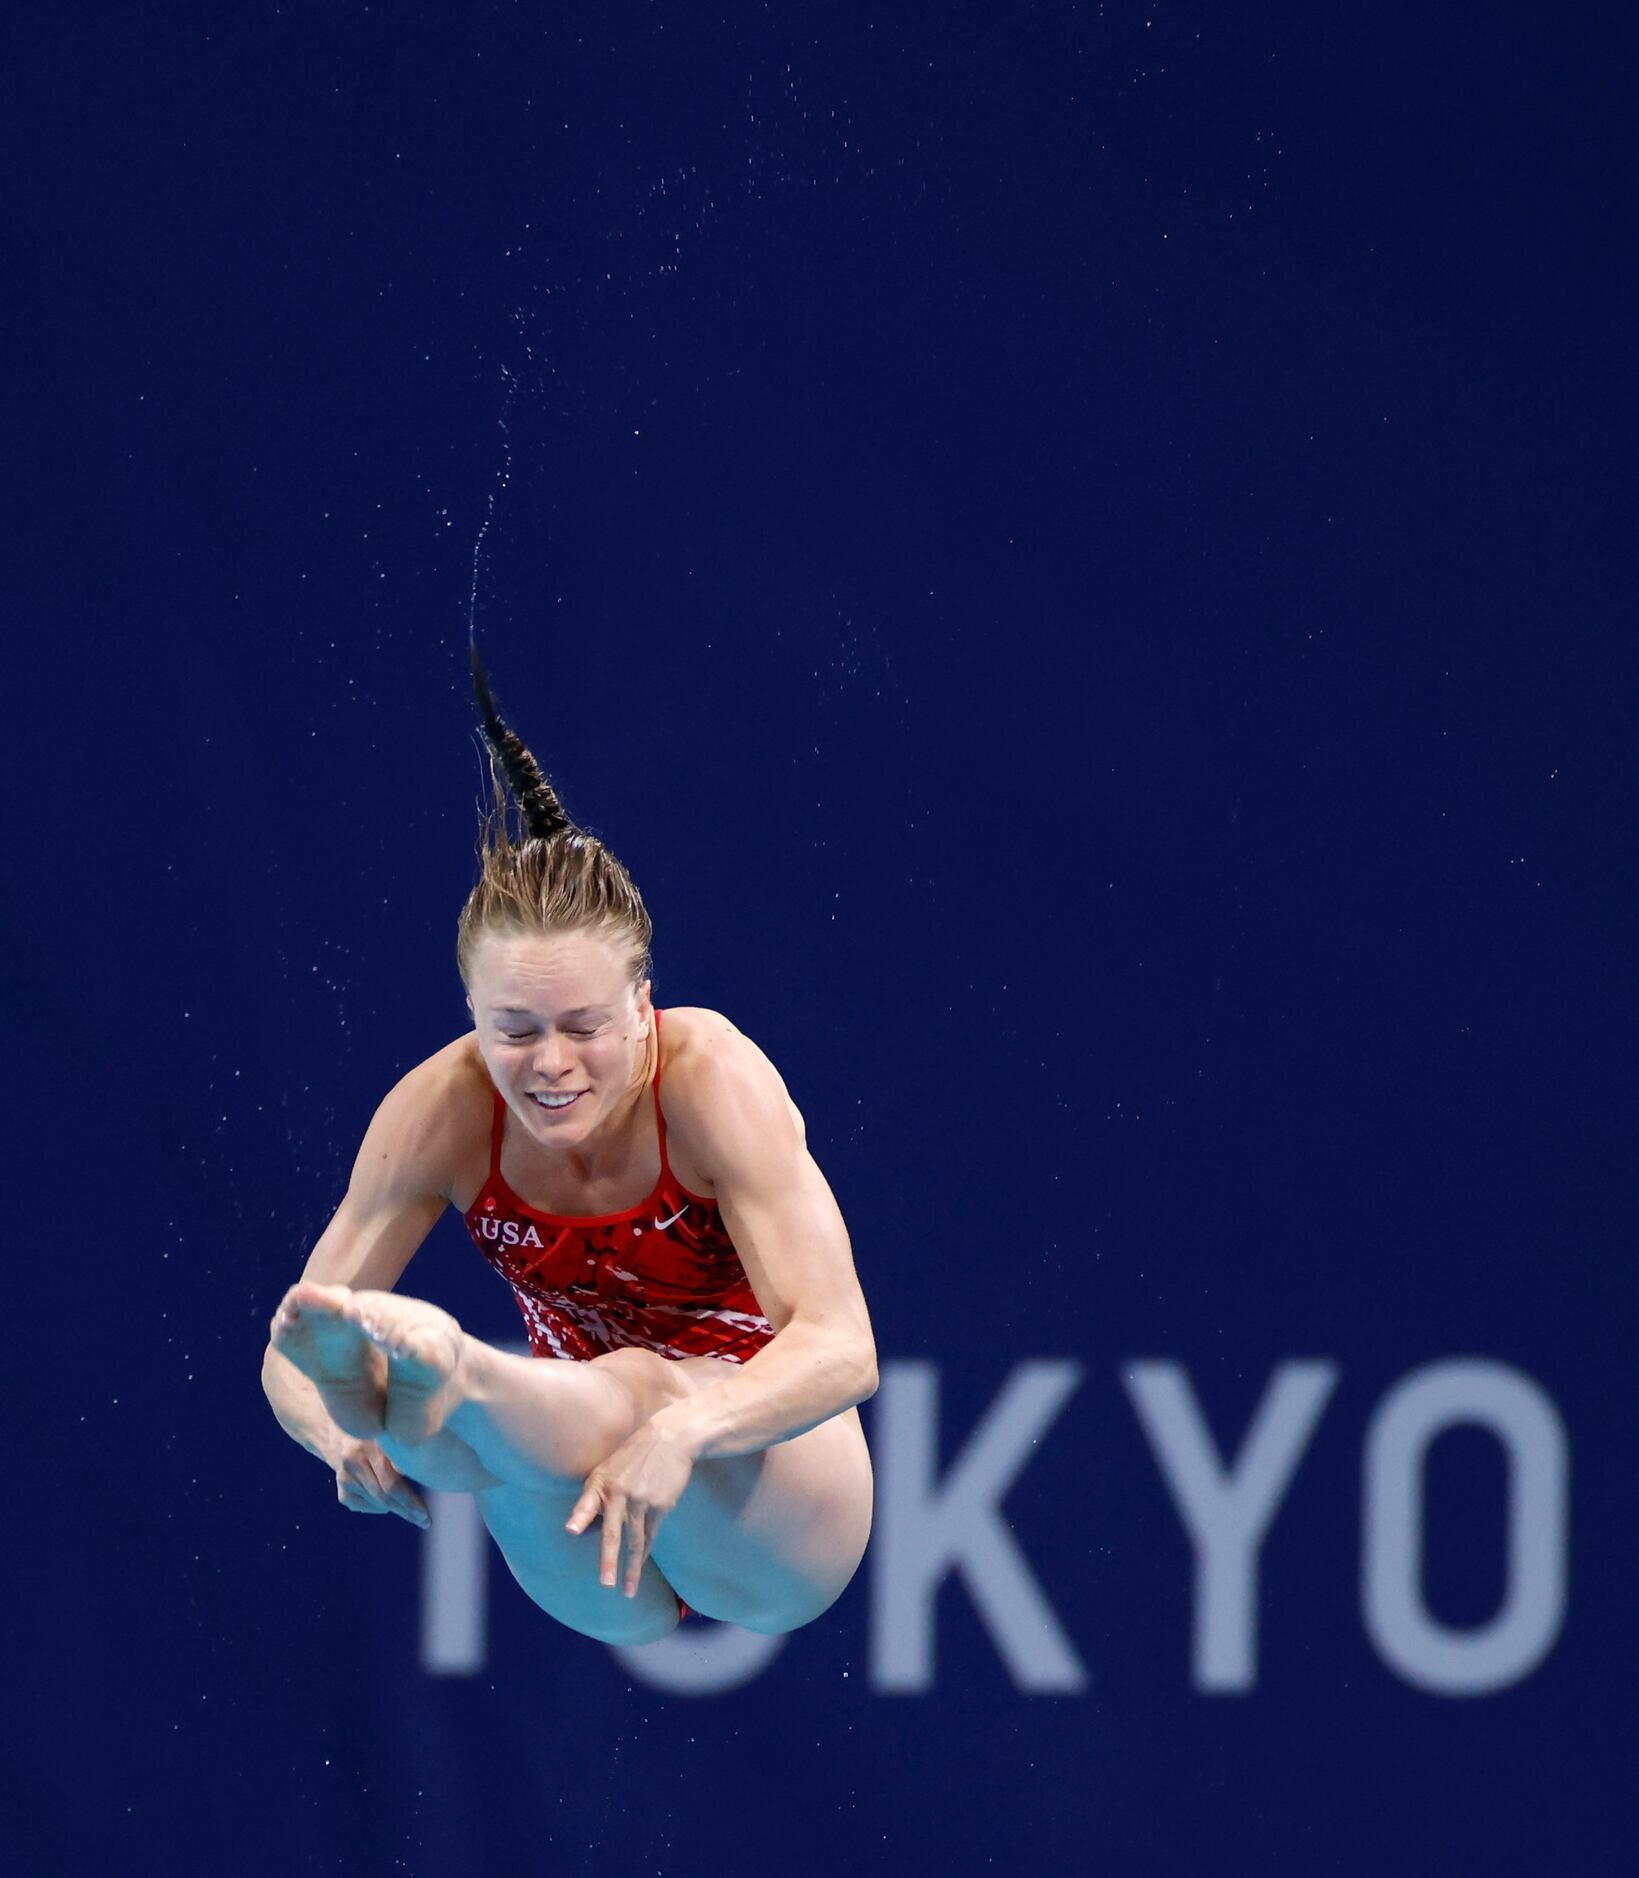 USA’s Krysta Palmer dives in round 5 of 5 In the women’s 3 meter springboard semifinal...